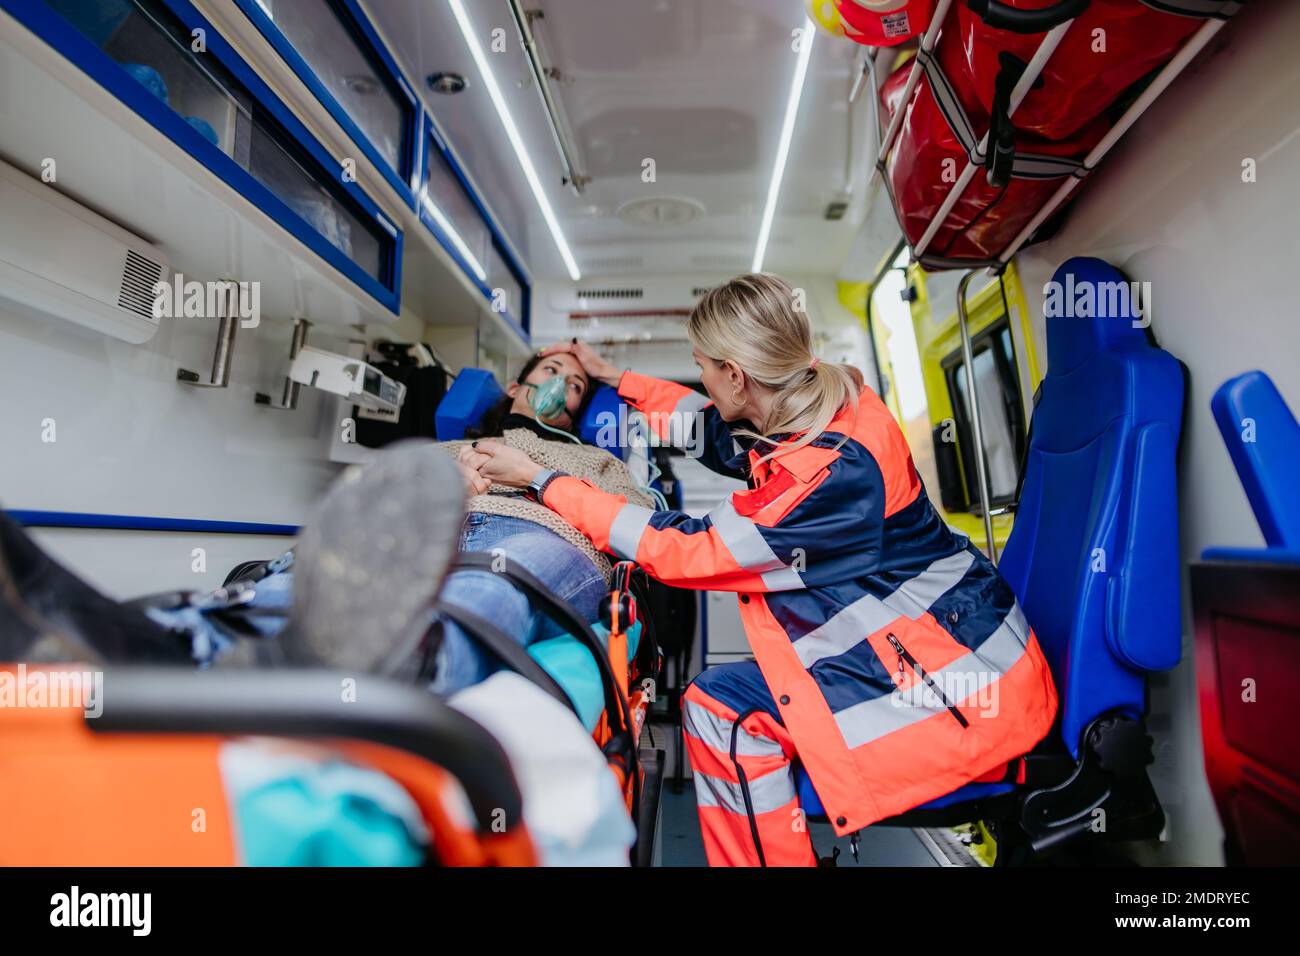 Rescuer taking care of patient, preparing her for transport. Stock Photo